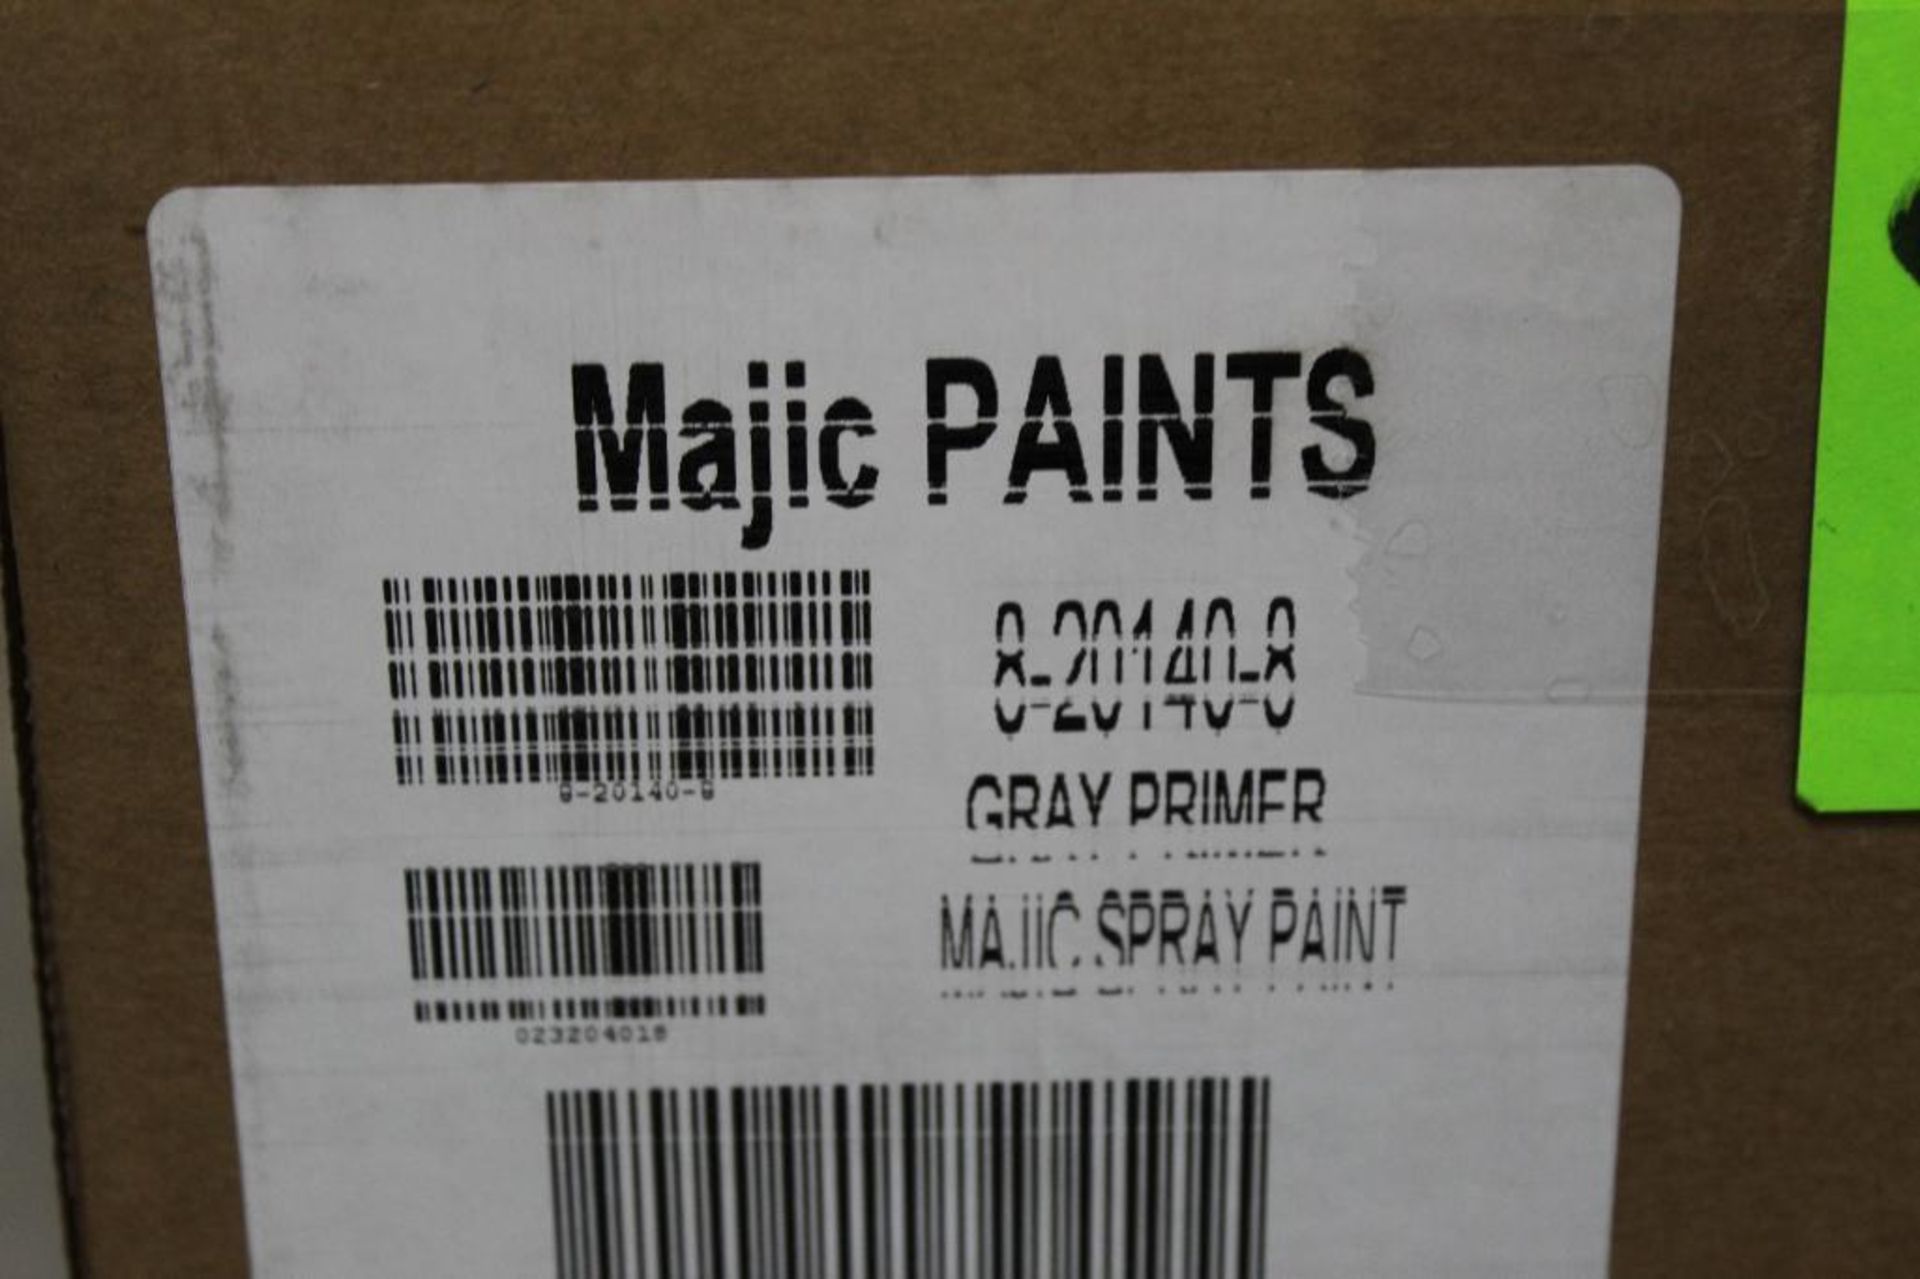 Lot of (21) Cases (6 Per Case) of Mavic Paints Gray Primer Spray Paint Product # 8-20140-8 - Image 4 of 4